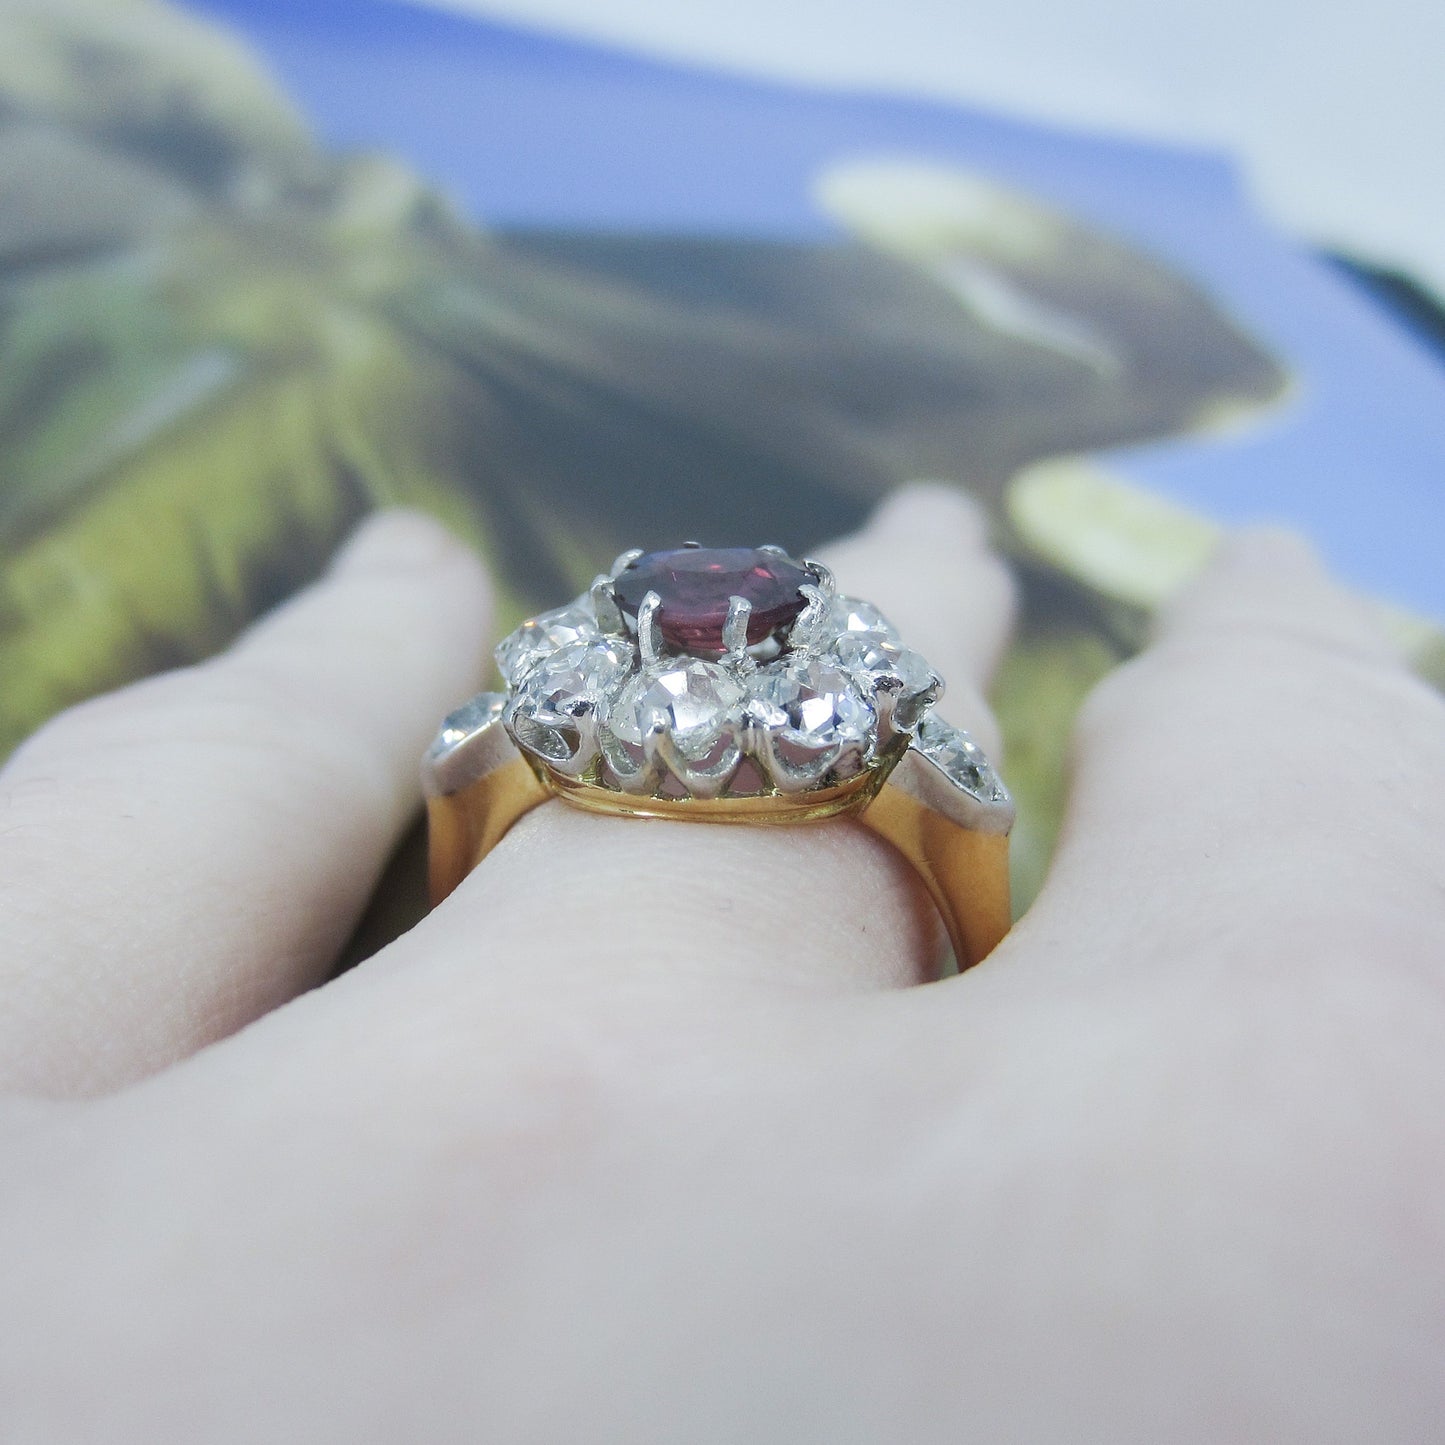 SOLD--Beautiful Edwardian Ruby and Old Mine Diamond Cluster Ring 14k/Plat c. 1900